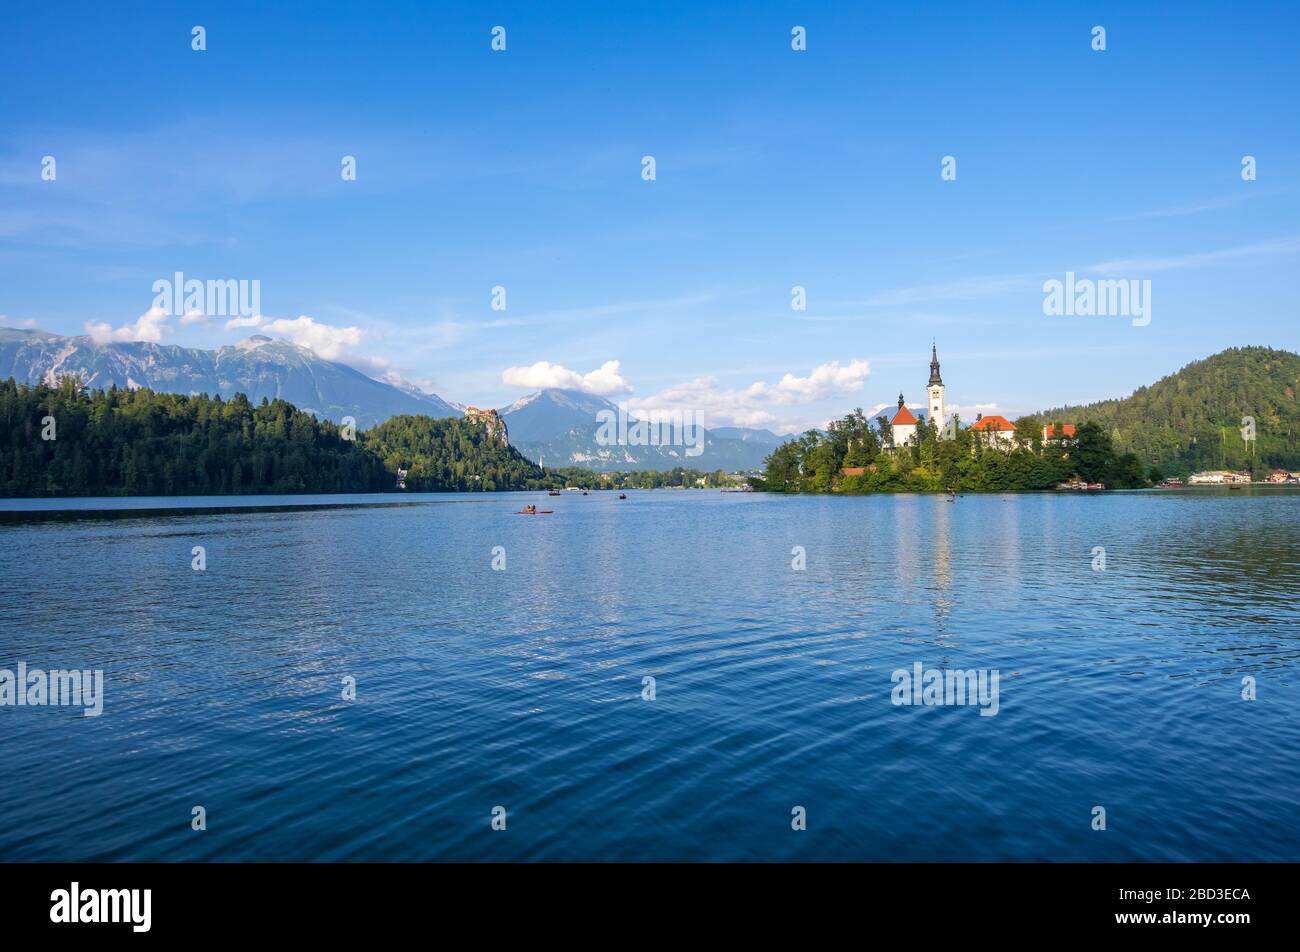 Amazing view on Bled Lake with church dedicated to the Assumption of Mary on a small island, Julian Alps, Slovenia Stock Photo